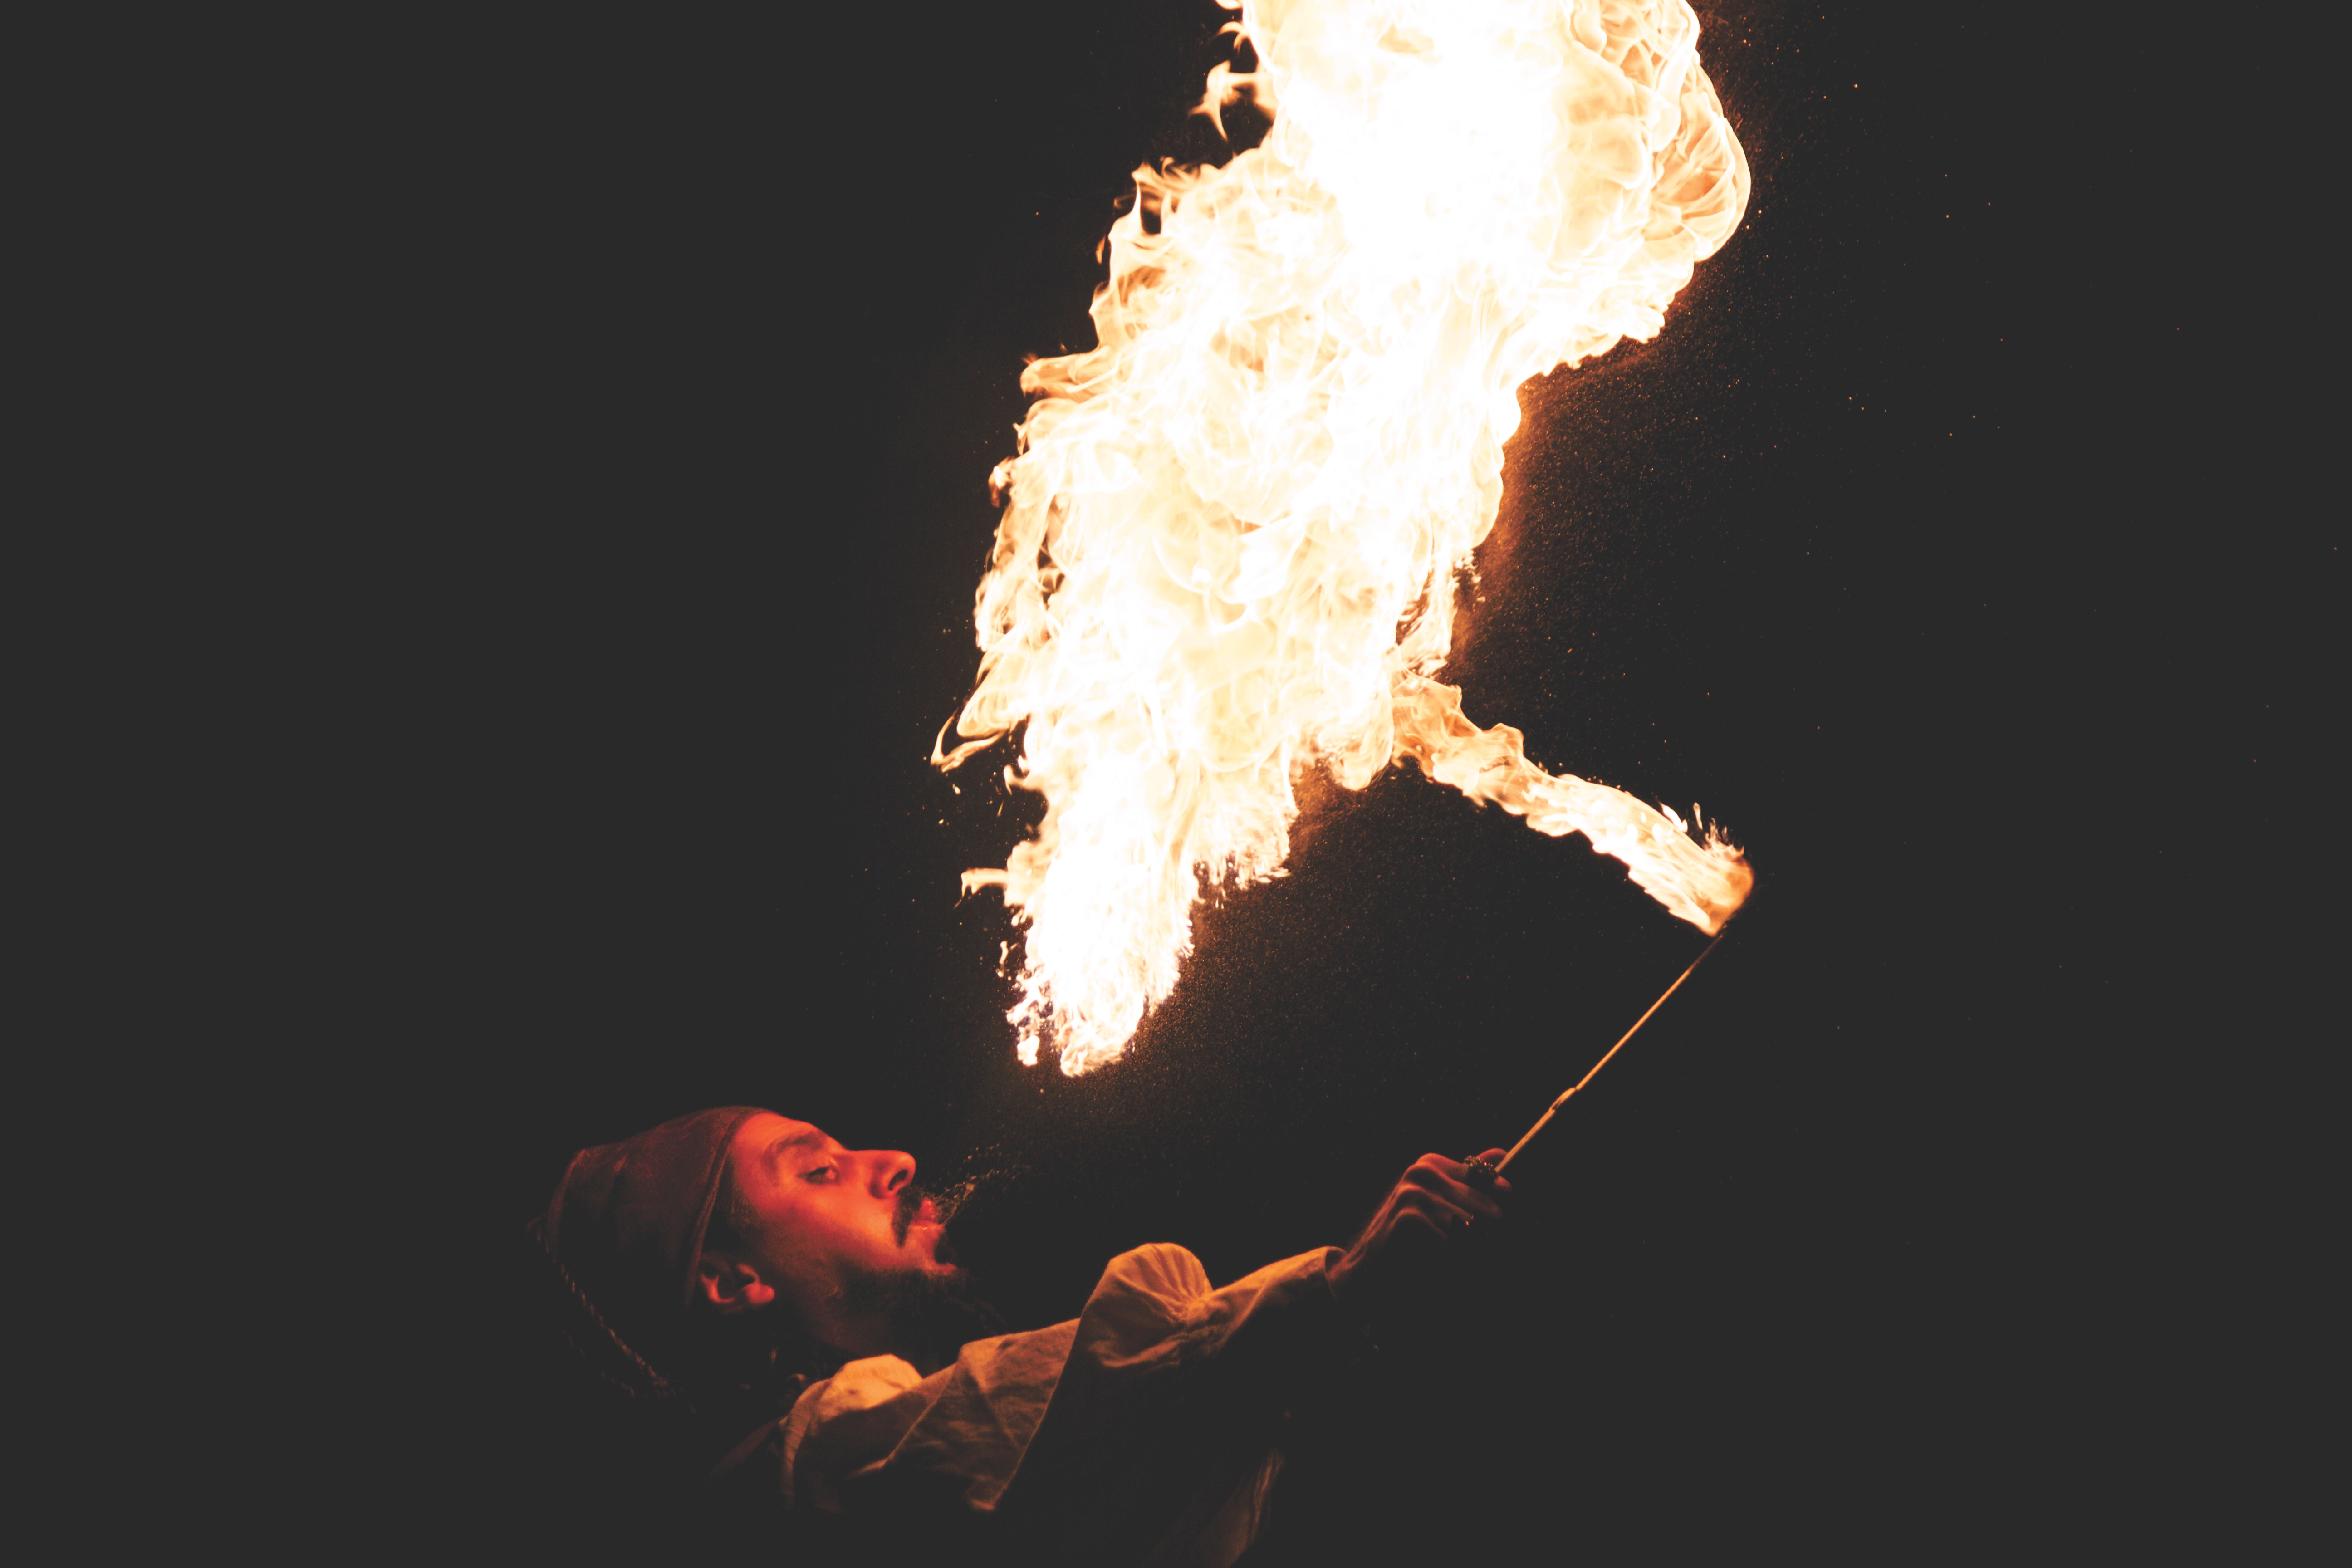 Man Blowing Fire during Nighttime, Daredevil, Entertainment, Fire, Person, HQ Photo